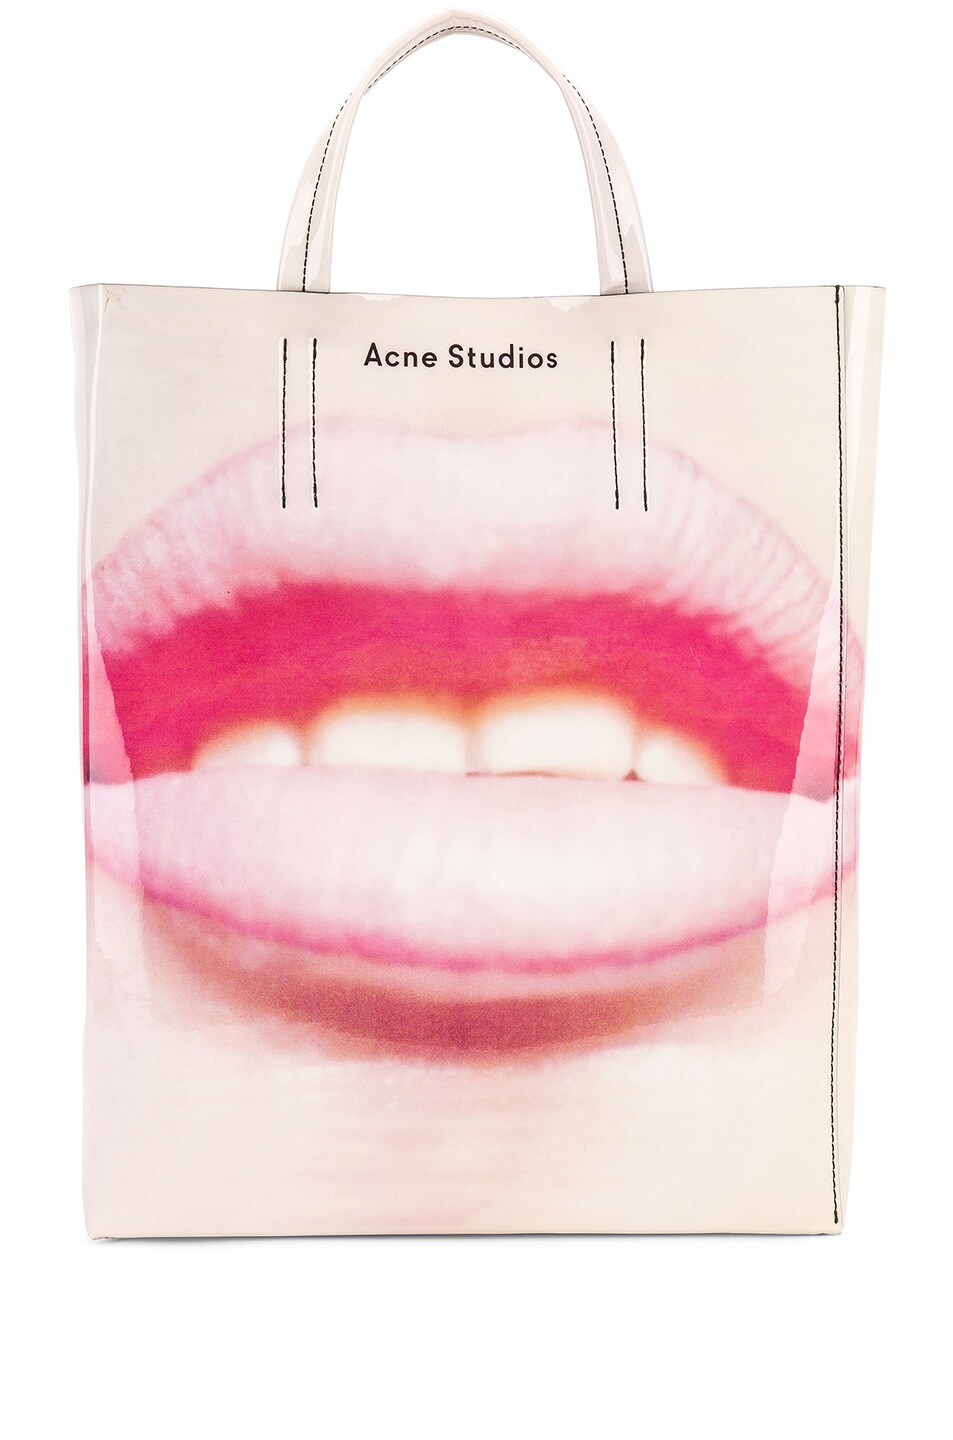 ACNE STUDIOS ACNE STUDIOS BAKER GRAPHIC BAG IN PINK,ACNE-WY18